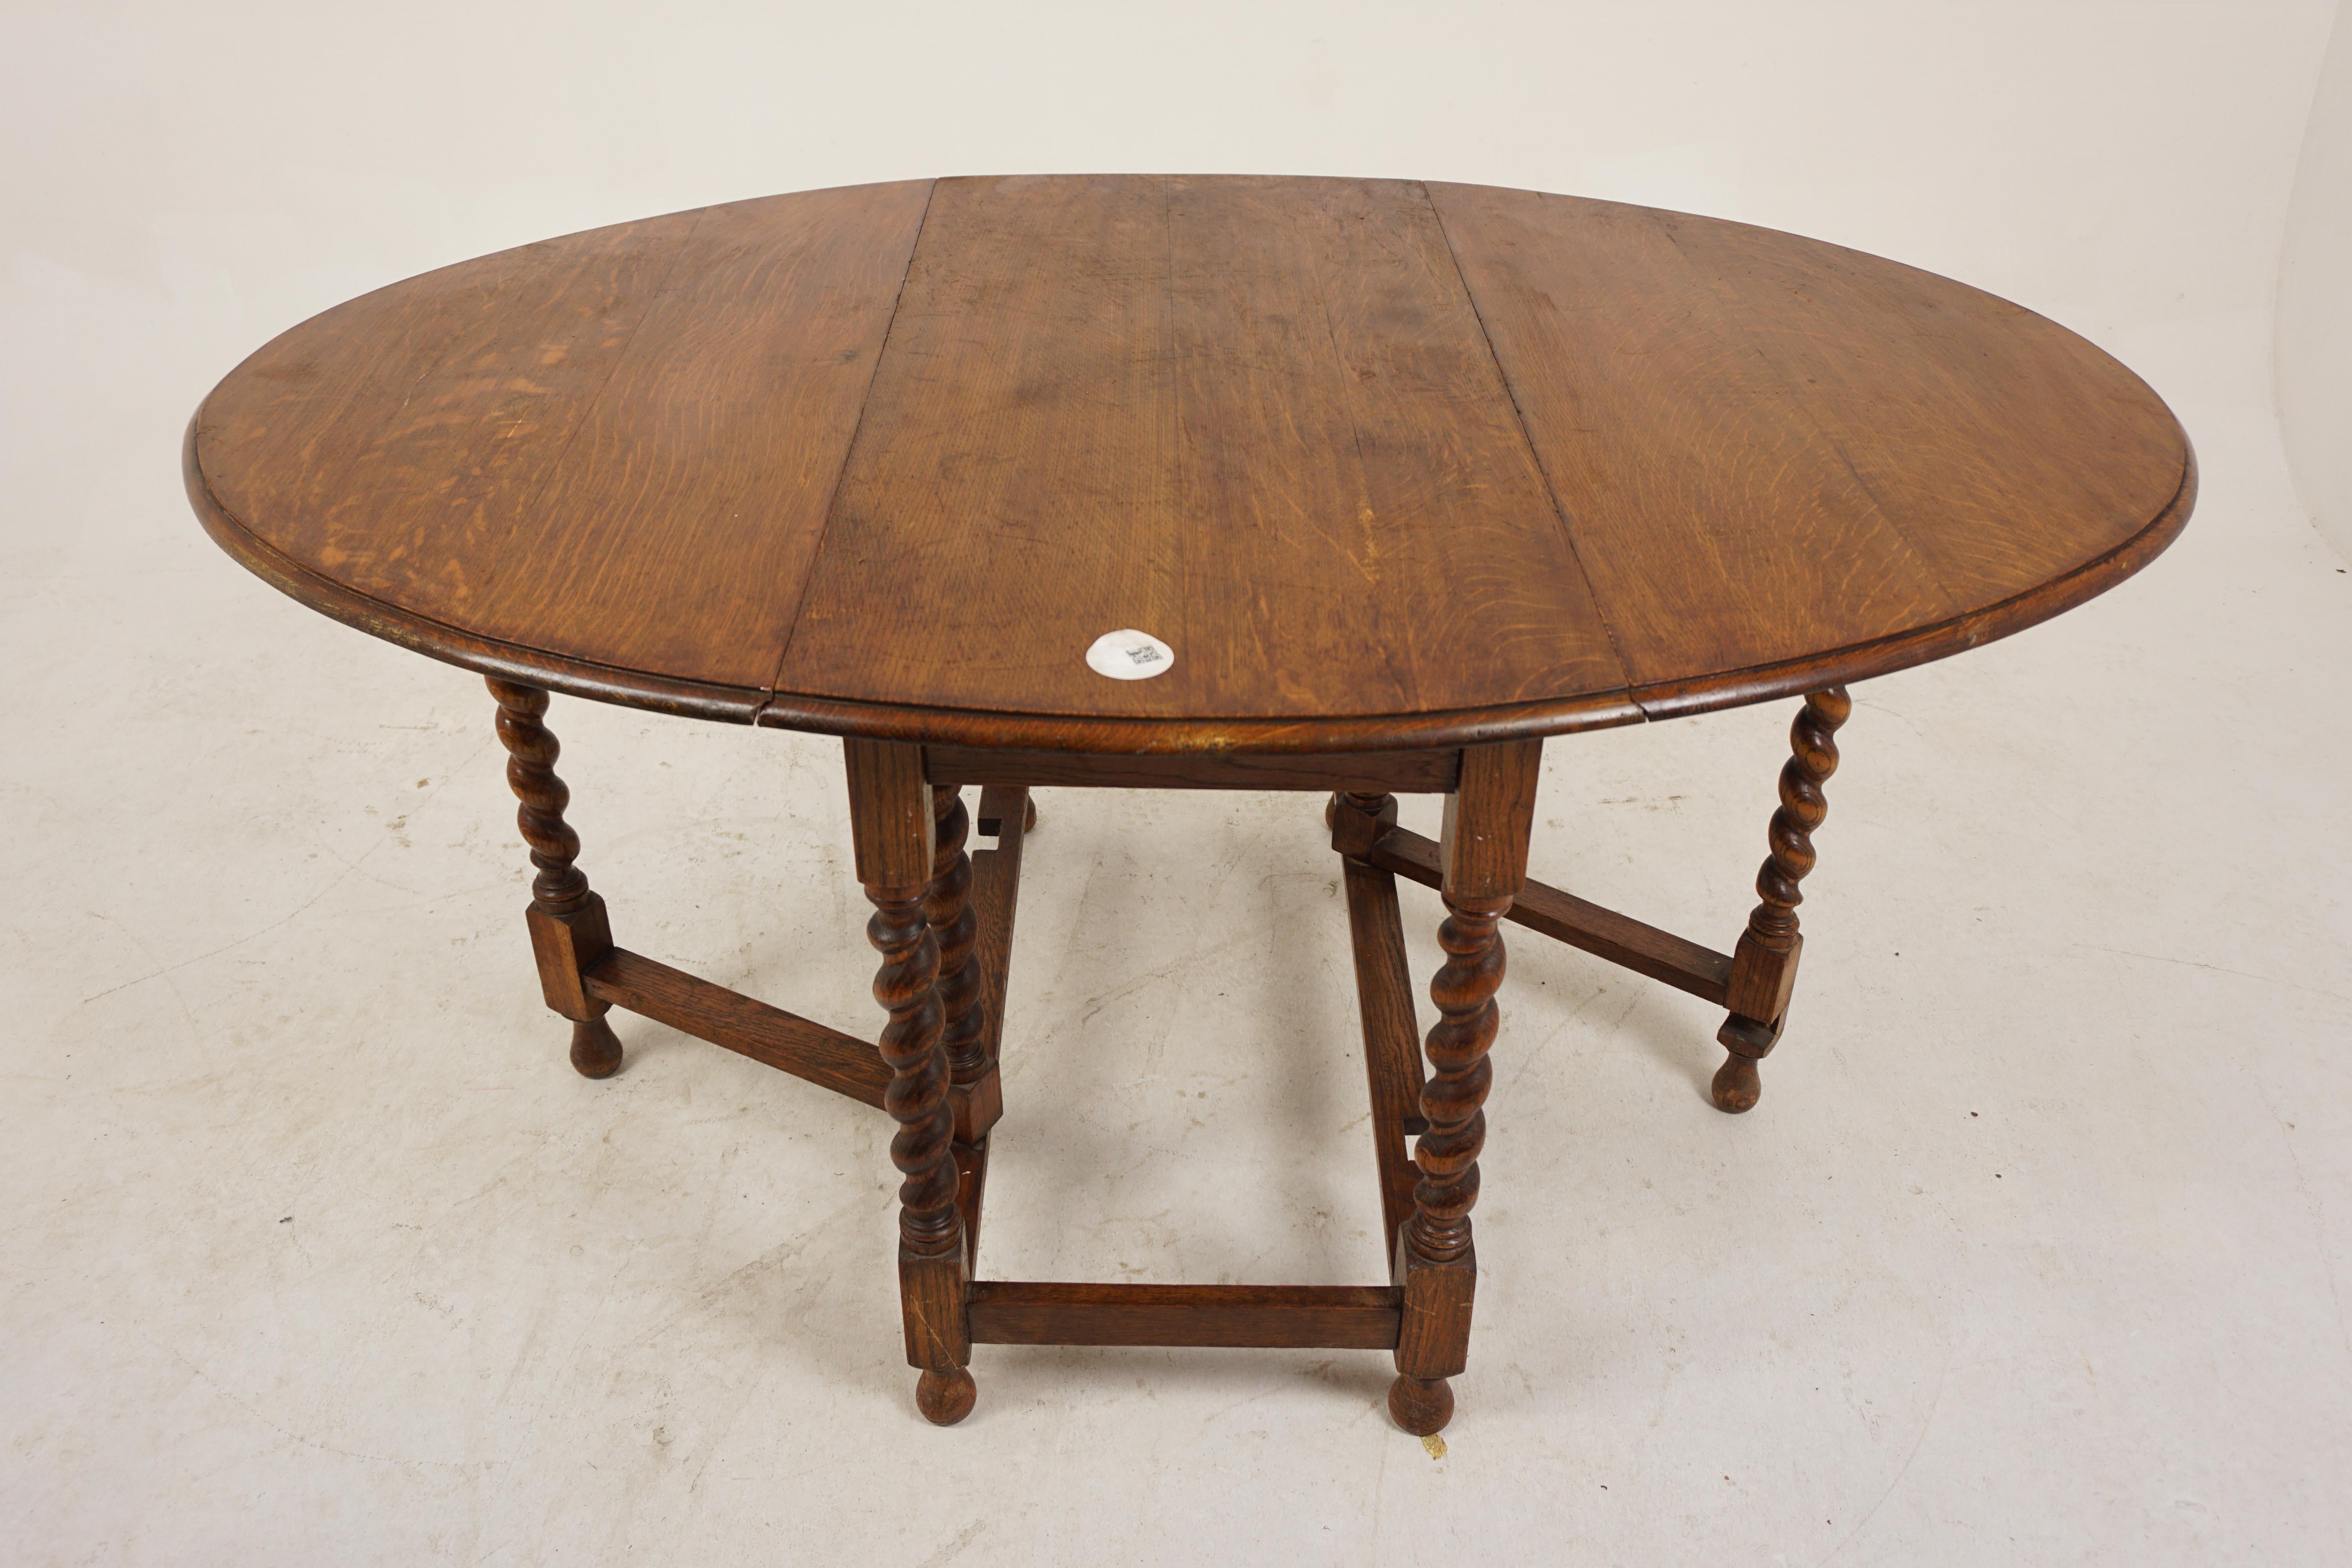 Hand-Crafted Antique Oak Table, Large Drop Leaf Dining Table, Scotland 1920, H1094